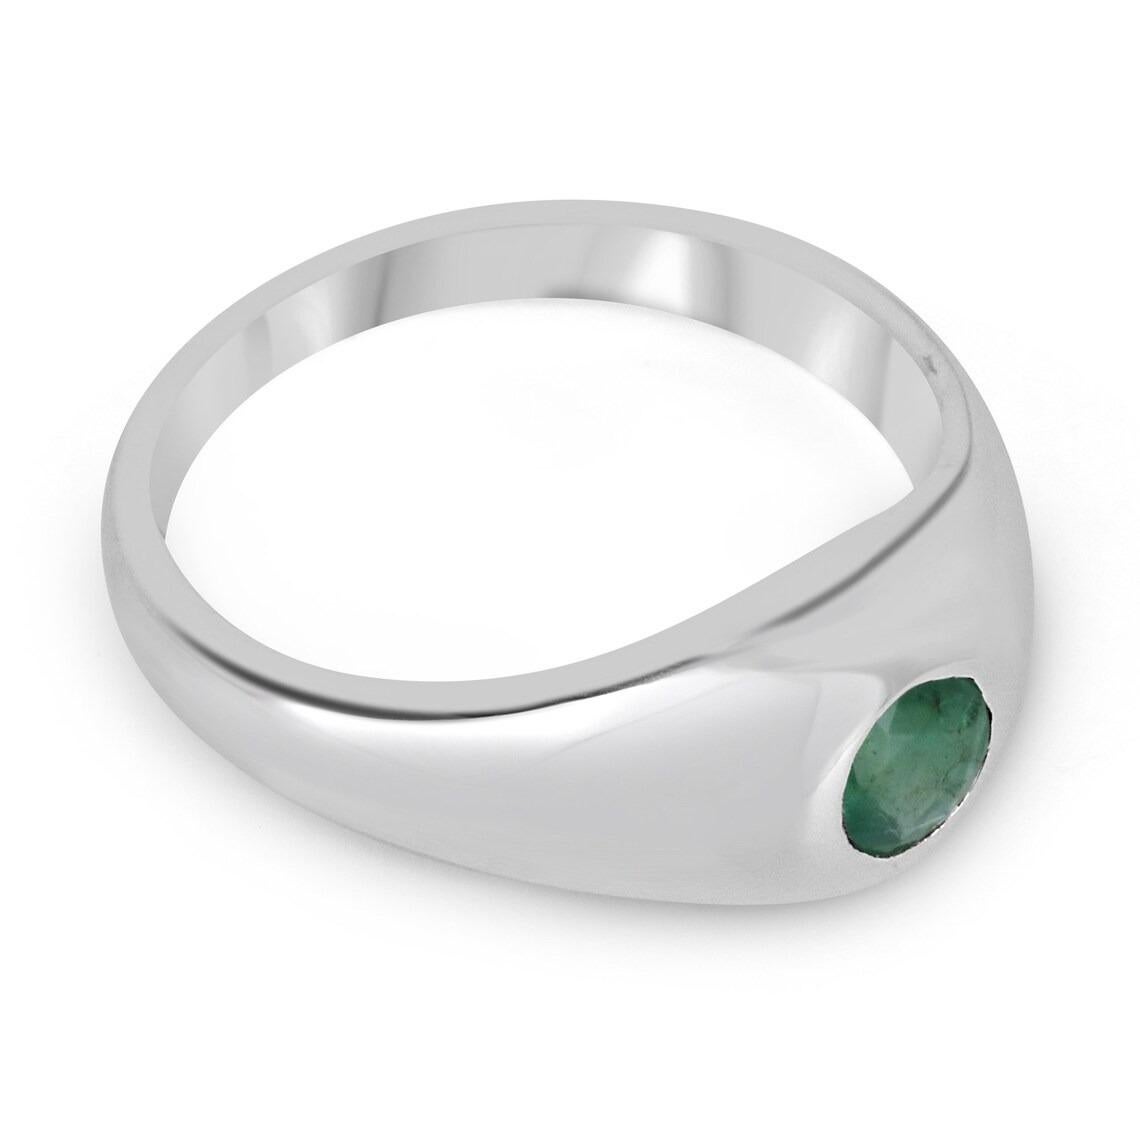 A lovely solitaire emerald ring; featuring a round-cut emerald from the origin of Zambia. The gemstone showcases a gorgeous medium-dark green color with good clarity and luster. Set in a secure solitaire bezel setting crafted in sterling